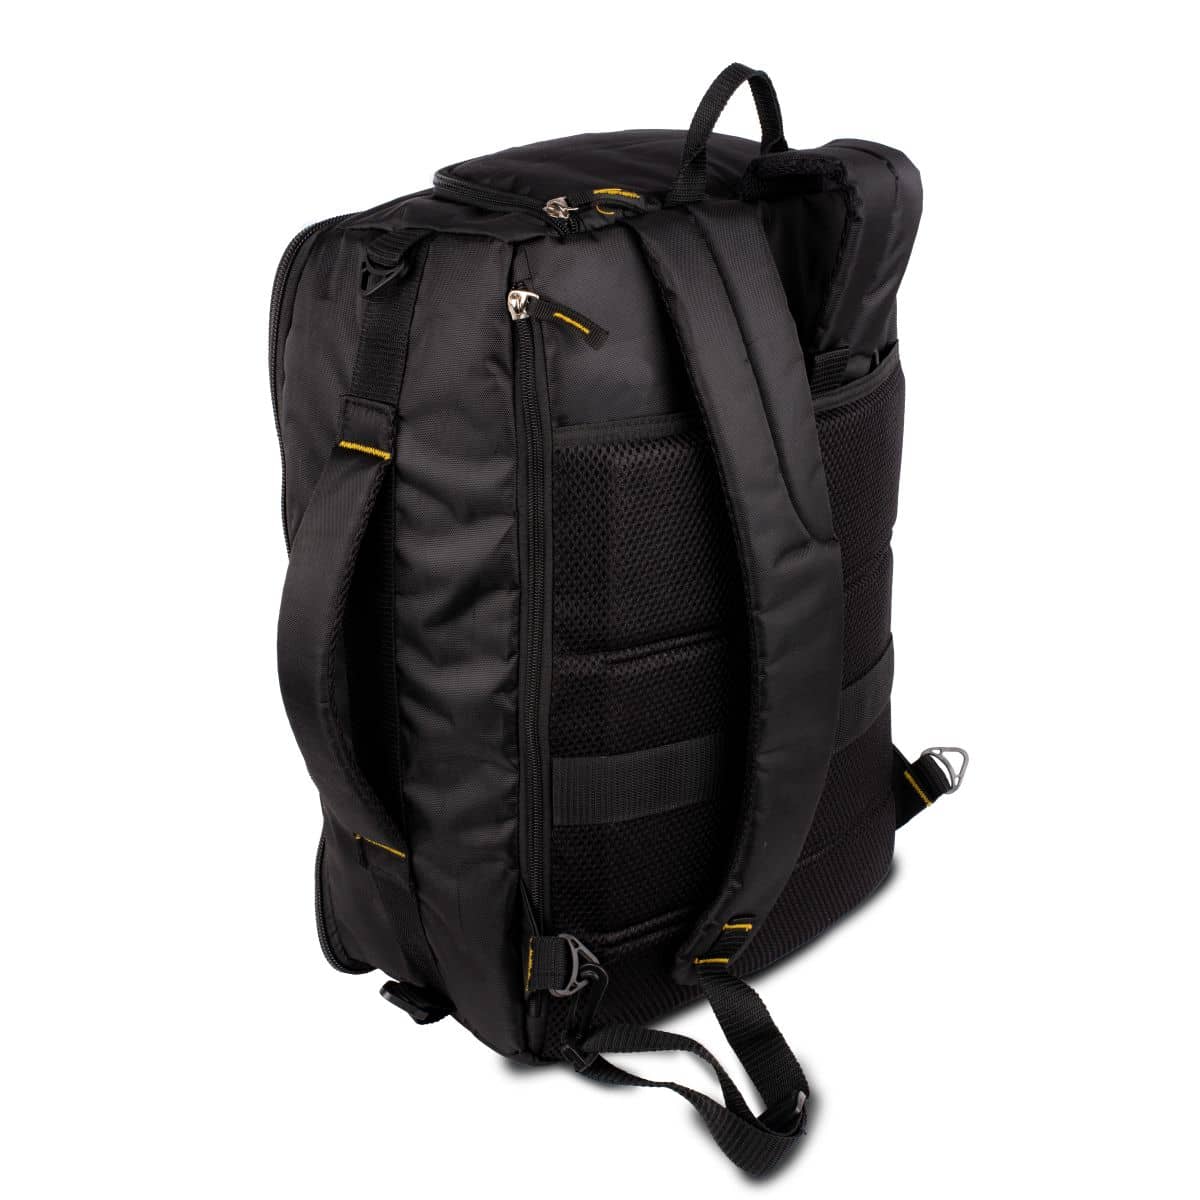 Overnighter bag with Laptop storage | Convertible to Backpack | Cabin ...